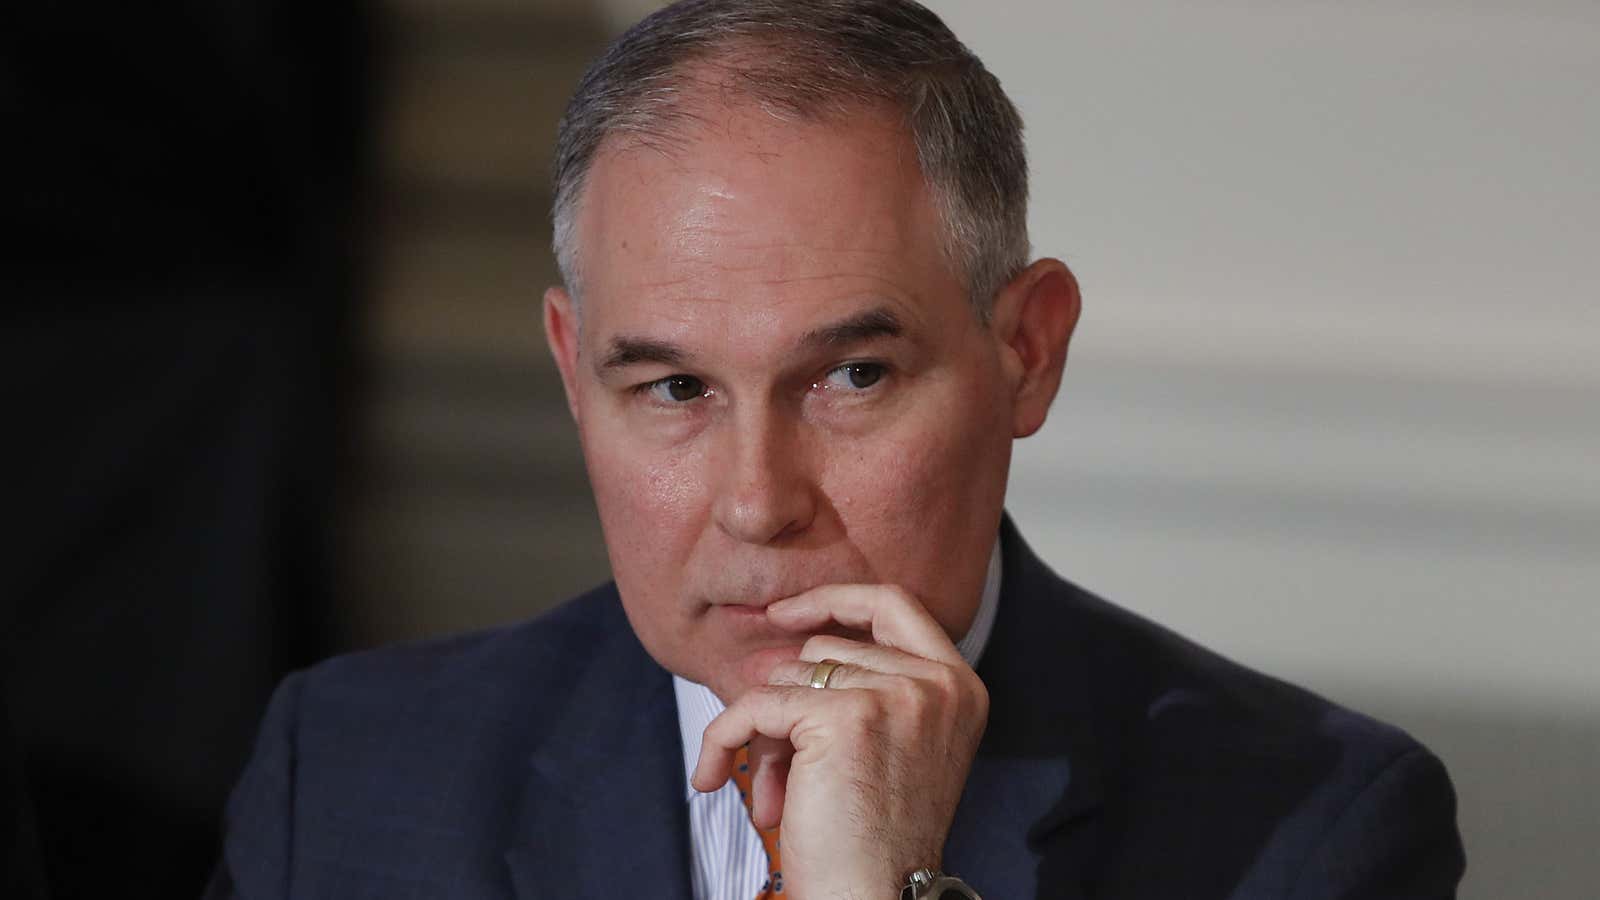 The Trump administration wanted massive cuts to the EPA